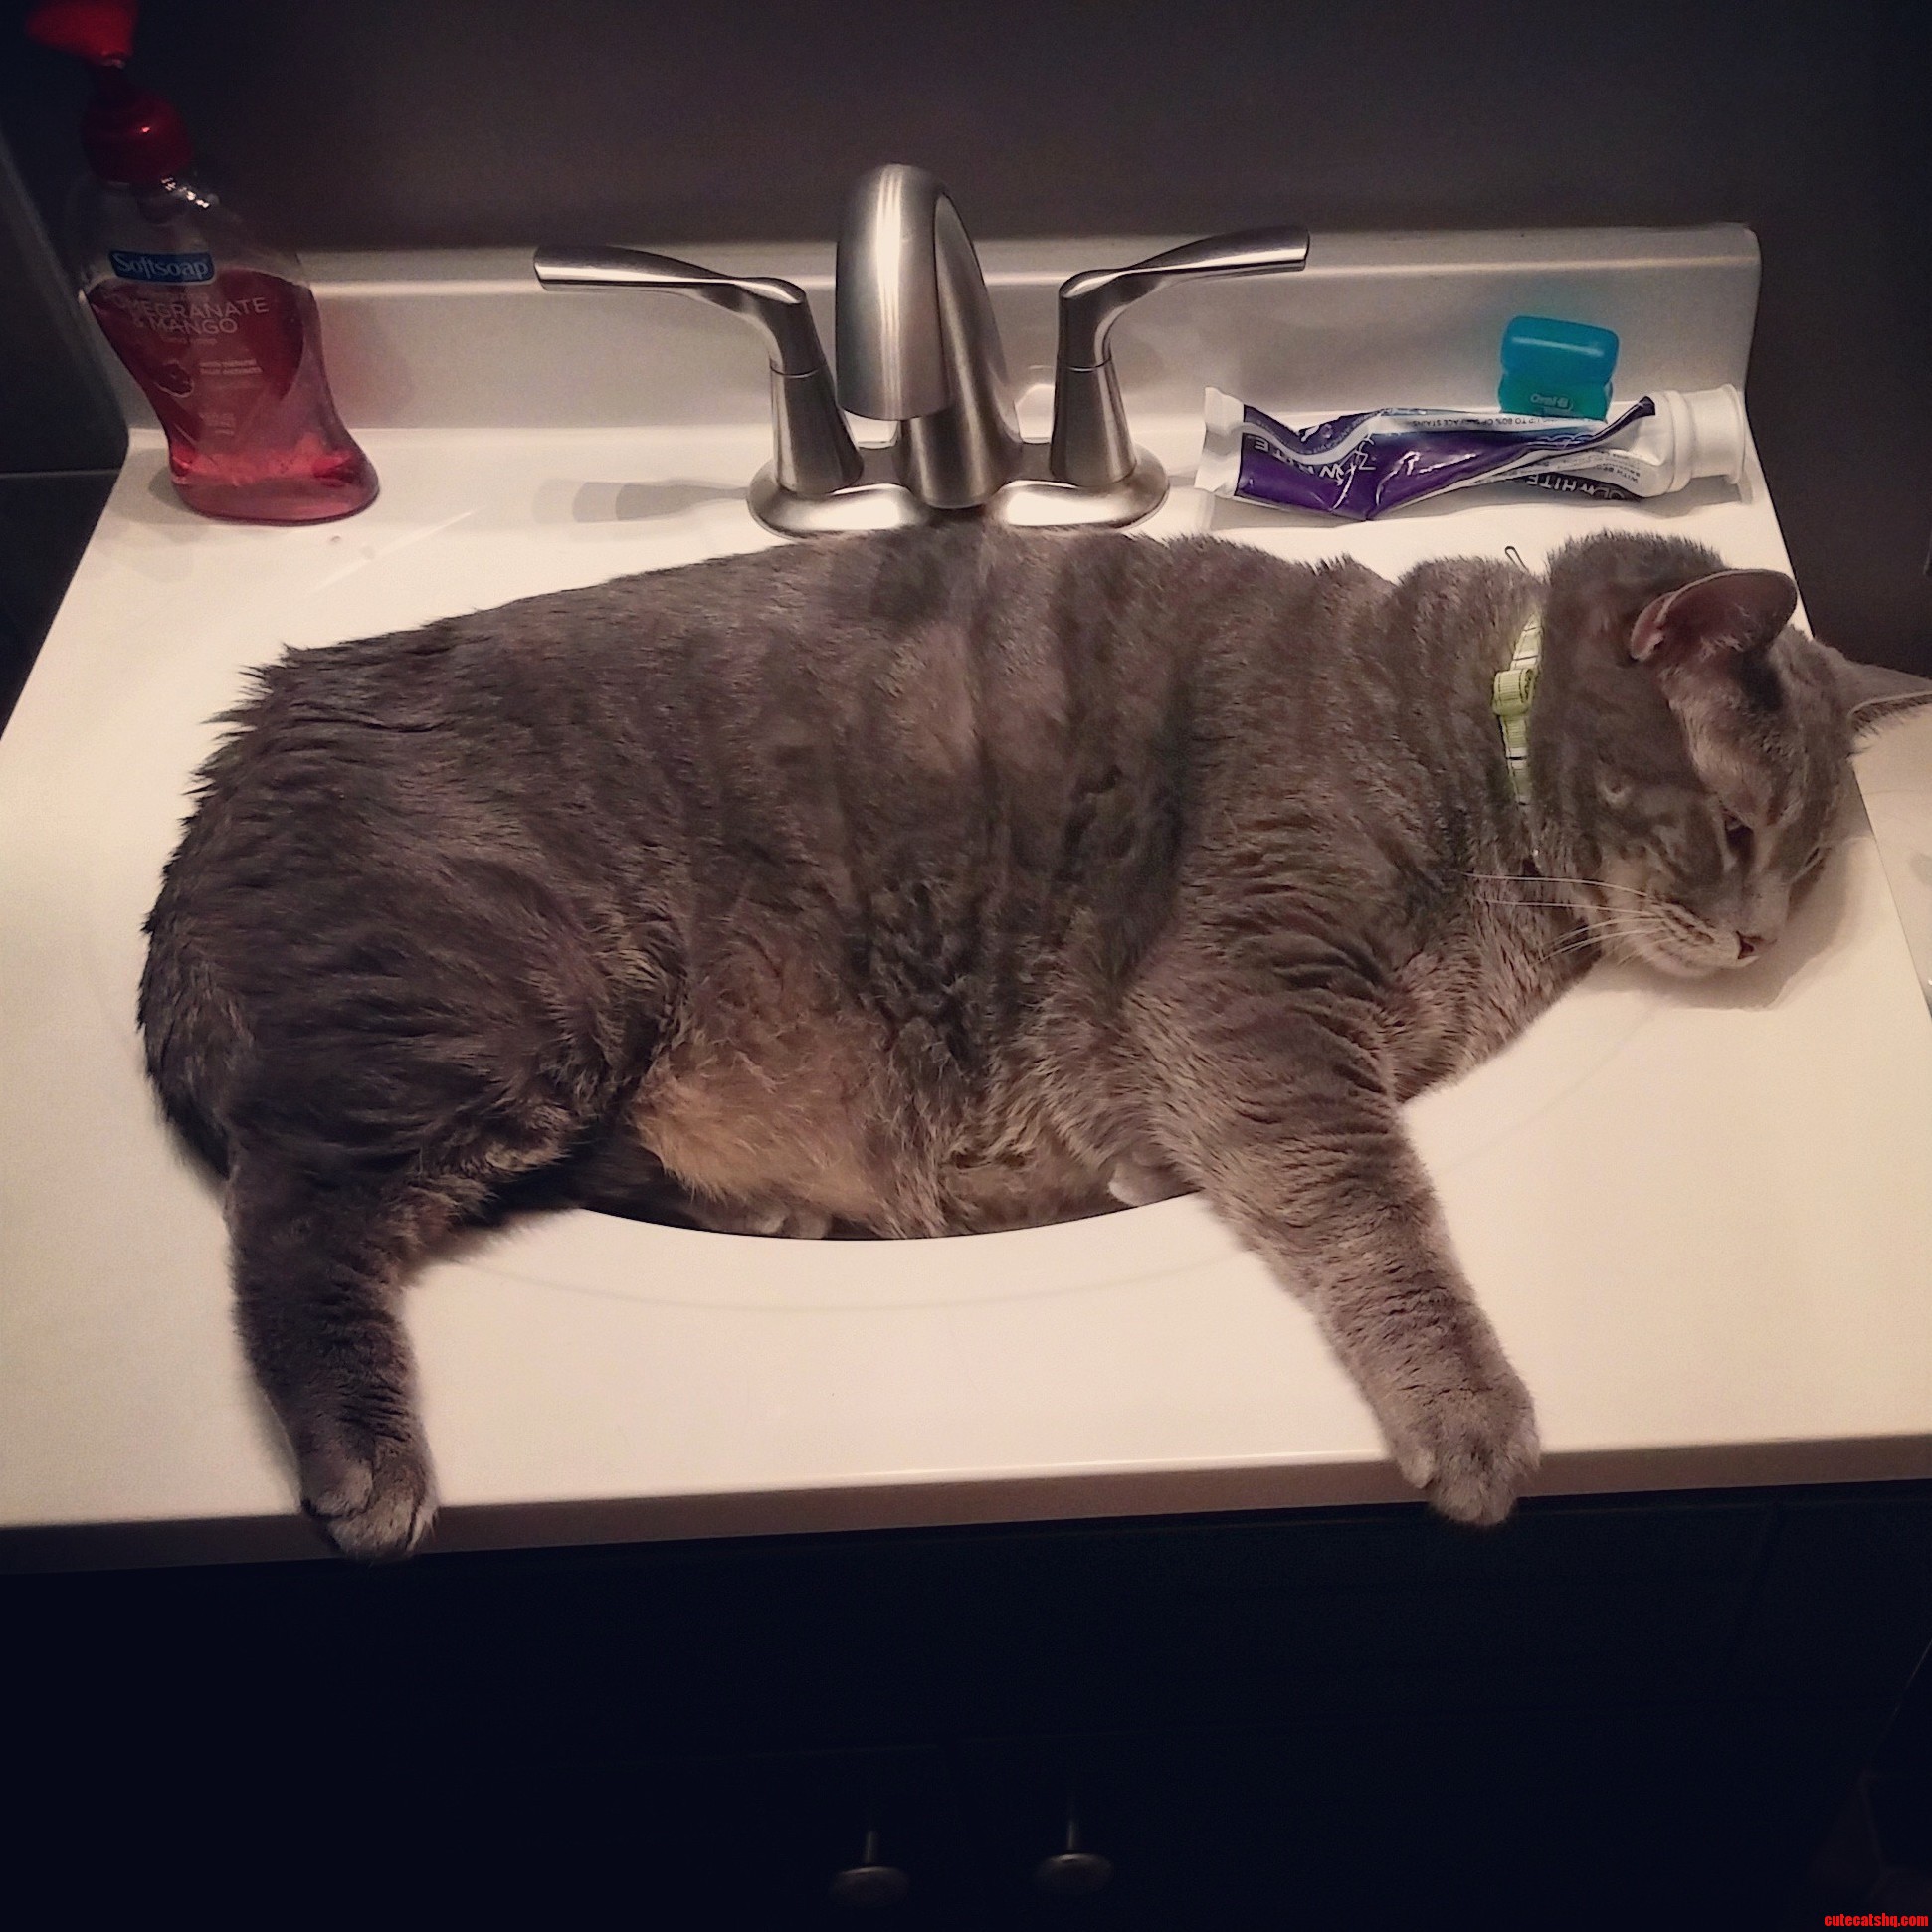 Keeping With The Cats In Sinks Theme Heres My Obese Cat.